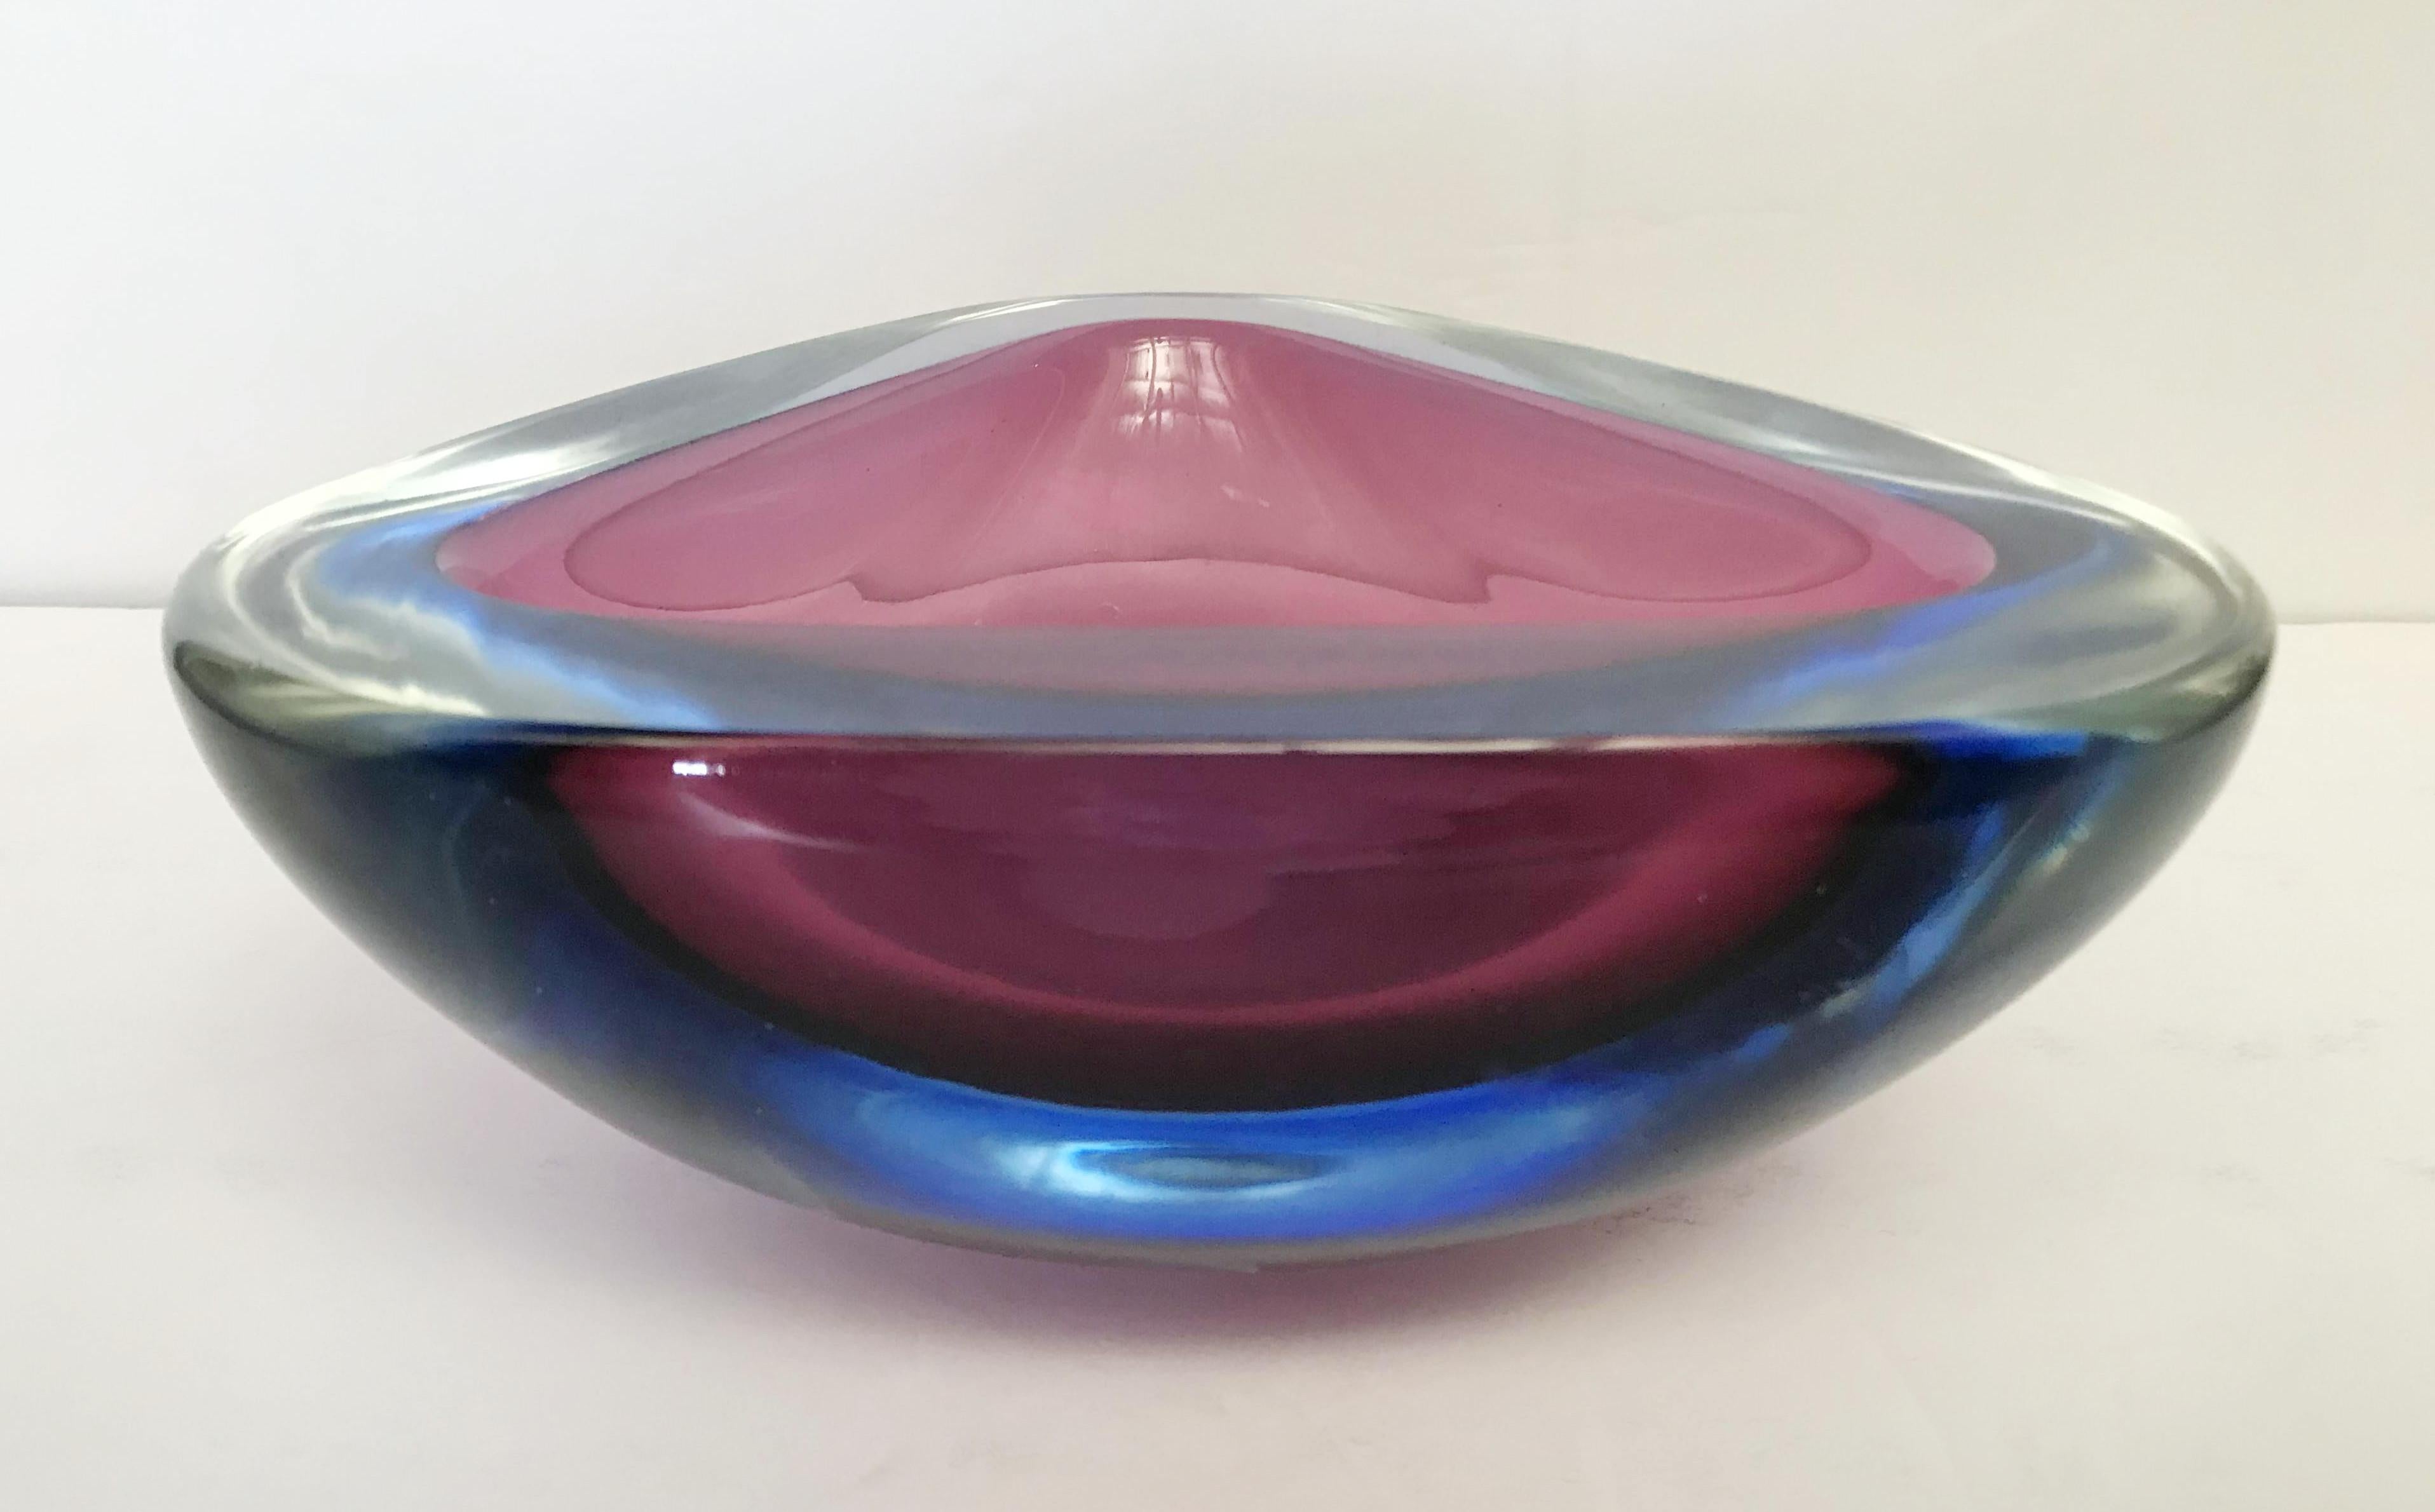 Vintage Italian amethyst triangular Murano glass bowl blown in Sommerso technique / Made in Italy, circa 1960s
Measures: Side width 8 inches / height 3 inches
1 in stock in Palm Springs currently ON FINAL CLEARANCE SALE for $599 !!! 
This piece